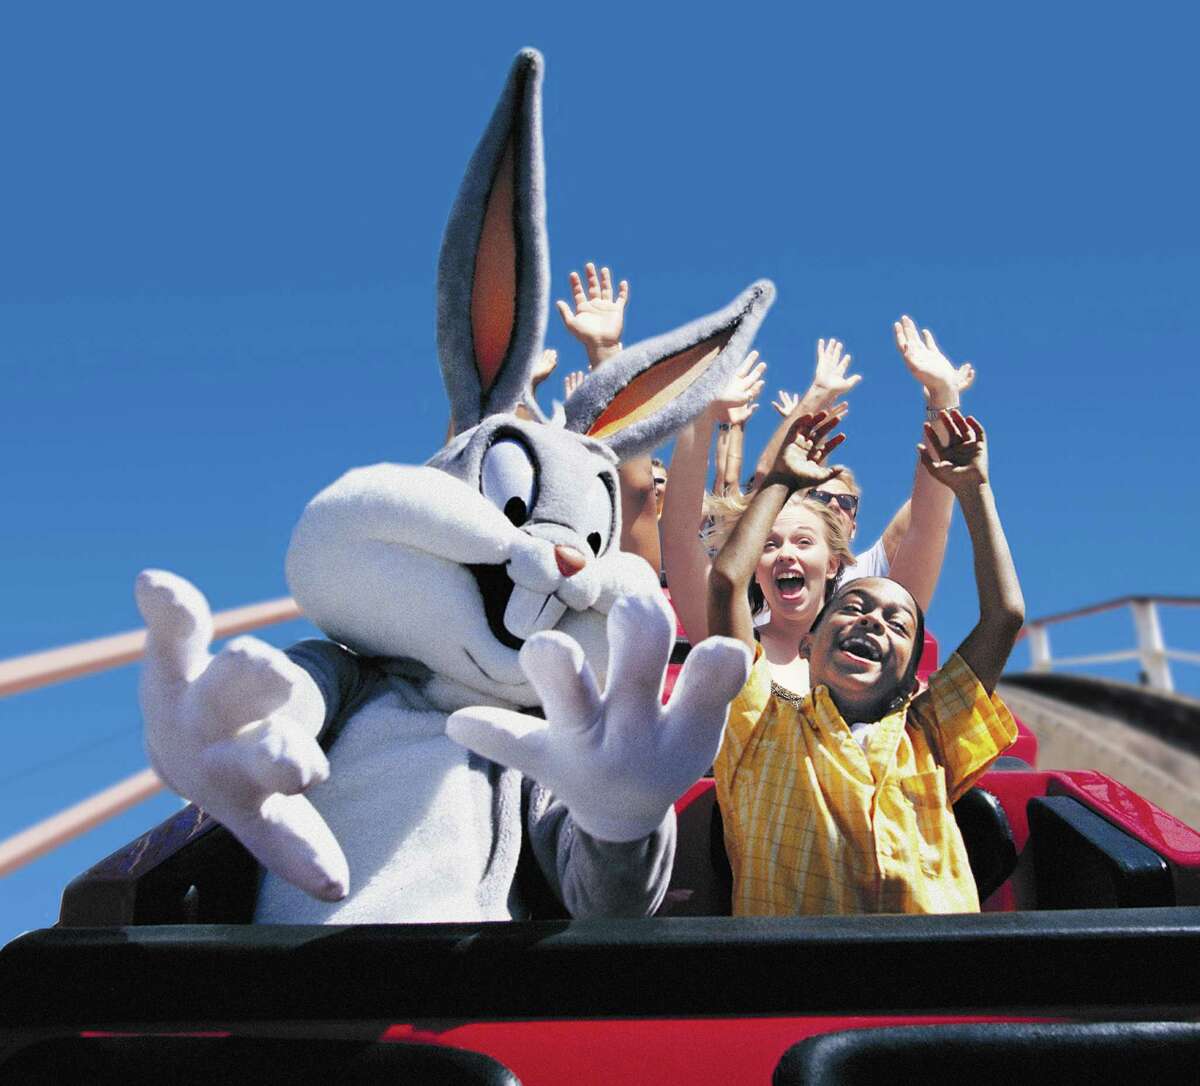 Six Flags Fiesta Texas holiday celebration comes complete with Looney Tunes characters and an opportunity to meet Santa in his castle Nov. 19 through Jan. 1.